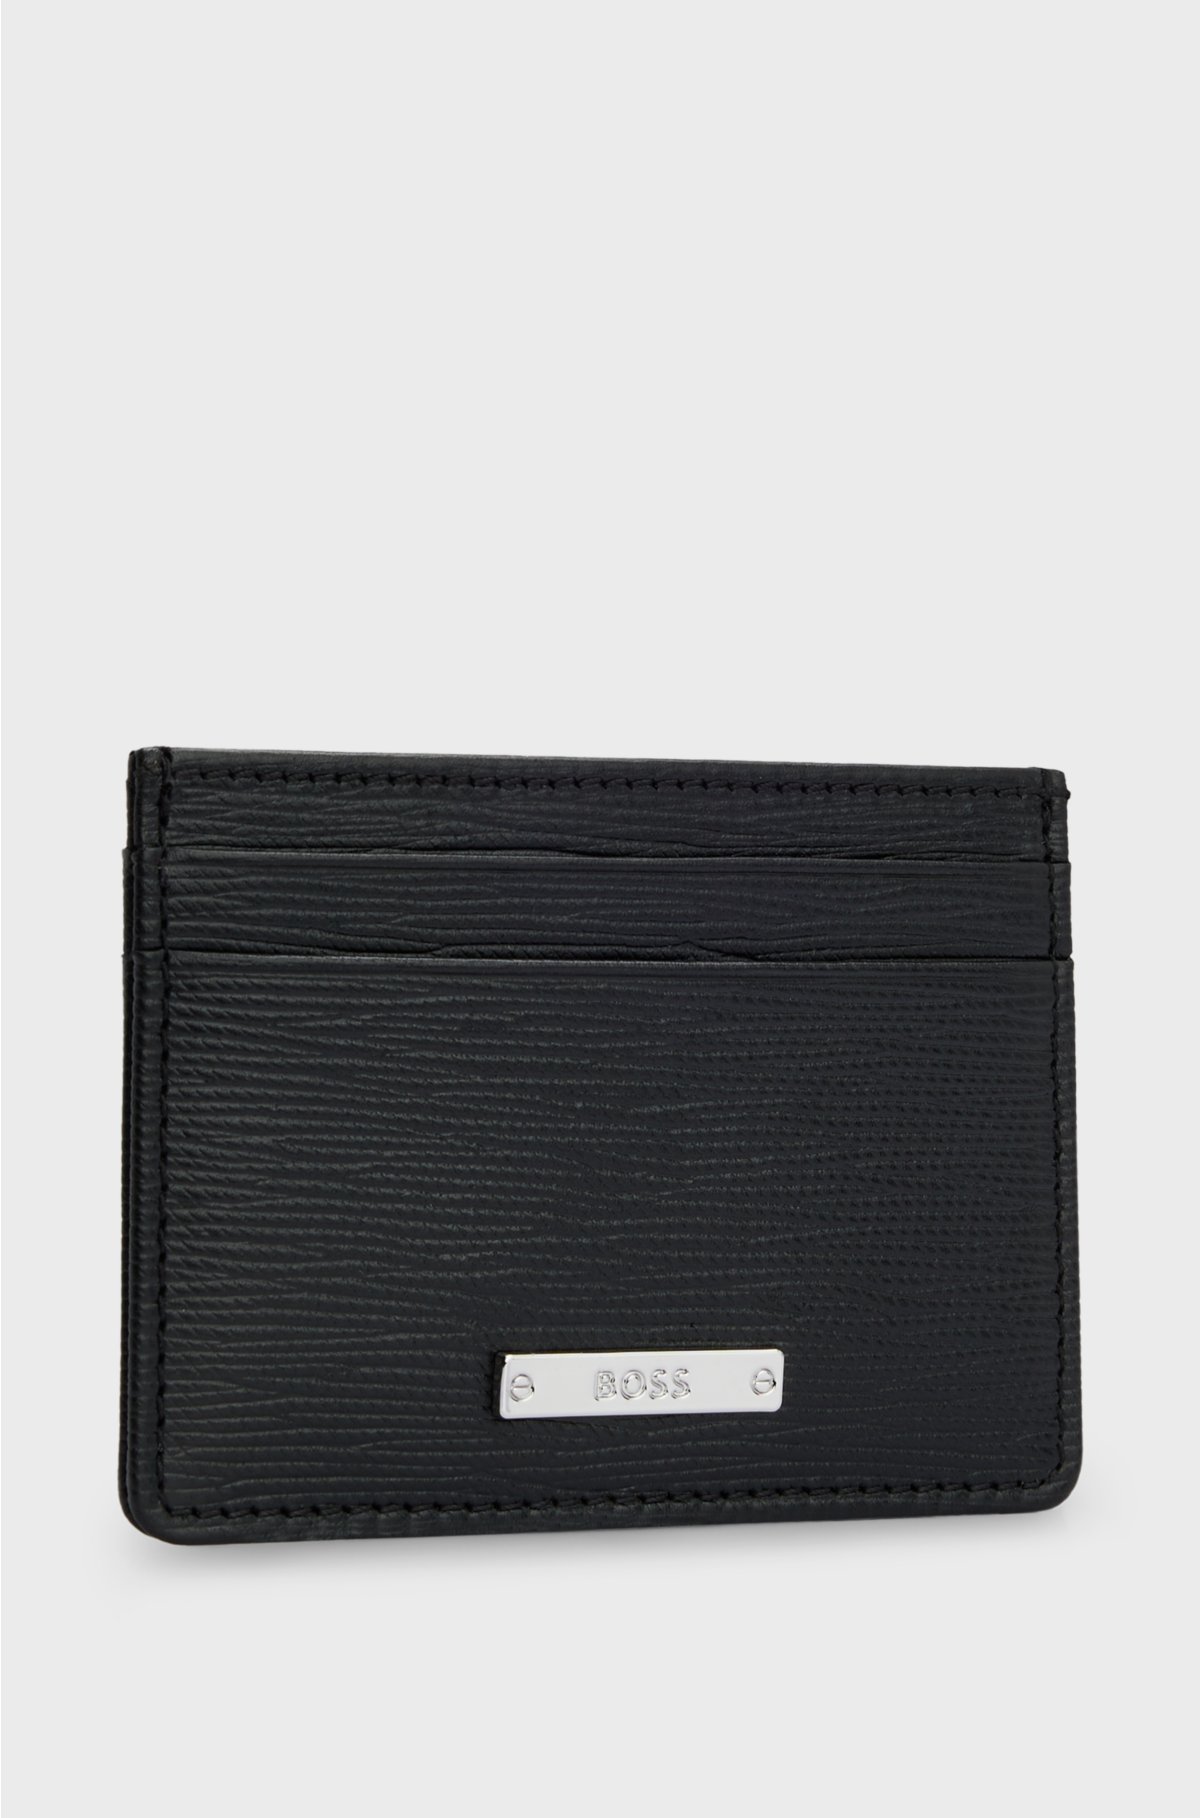 Embossed-leather card holder with logo plaque, Black